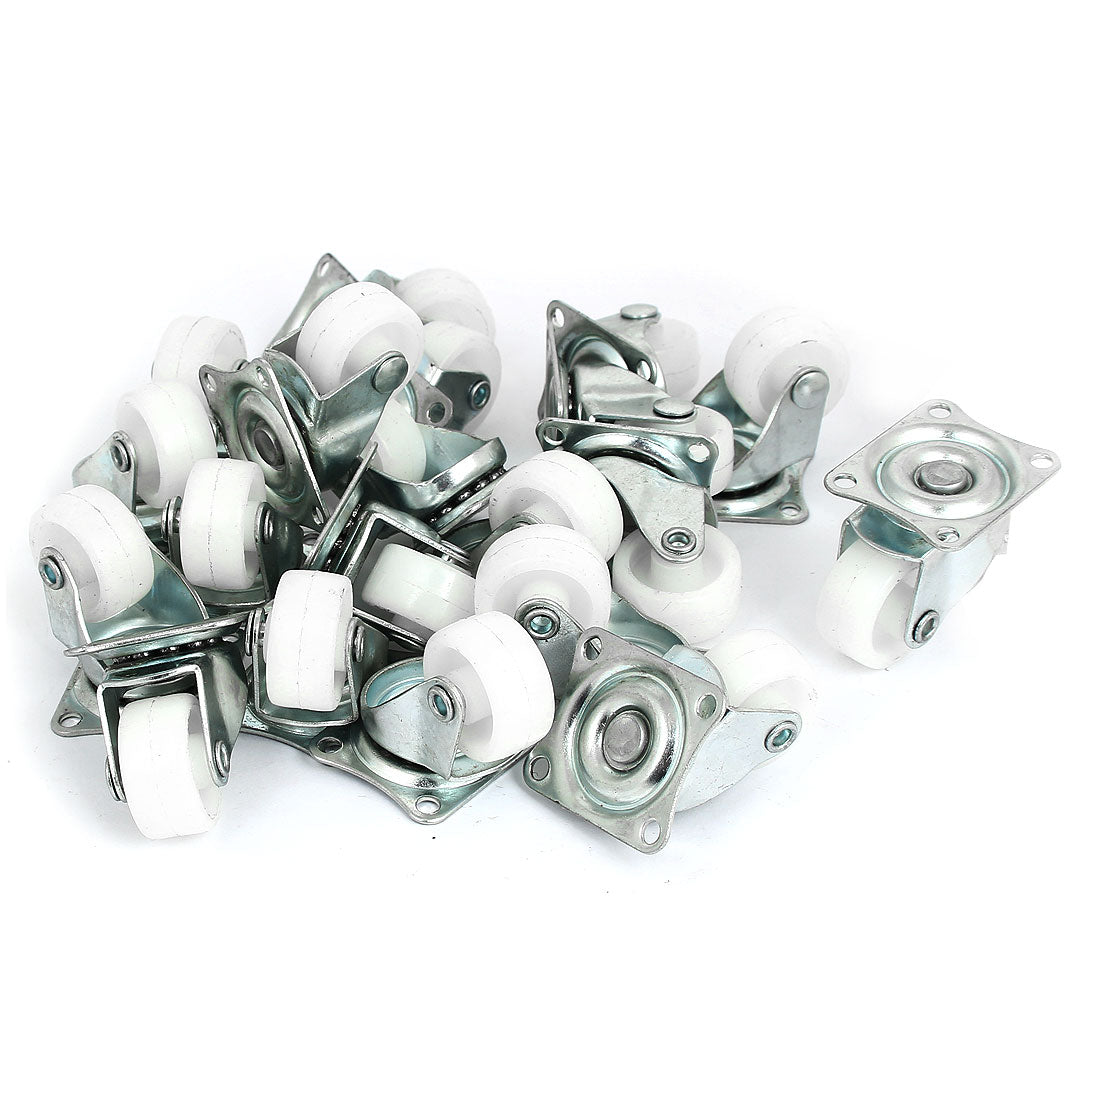 uxcell Uxcell 1" Hard Nylon Base Metal Top Plate Bearing Caster Wheels 20 Pcs